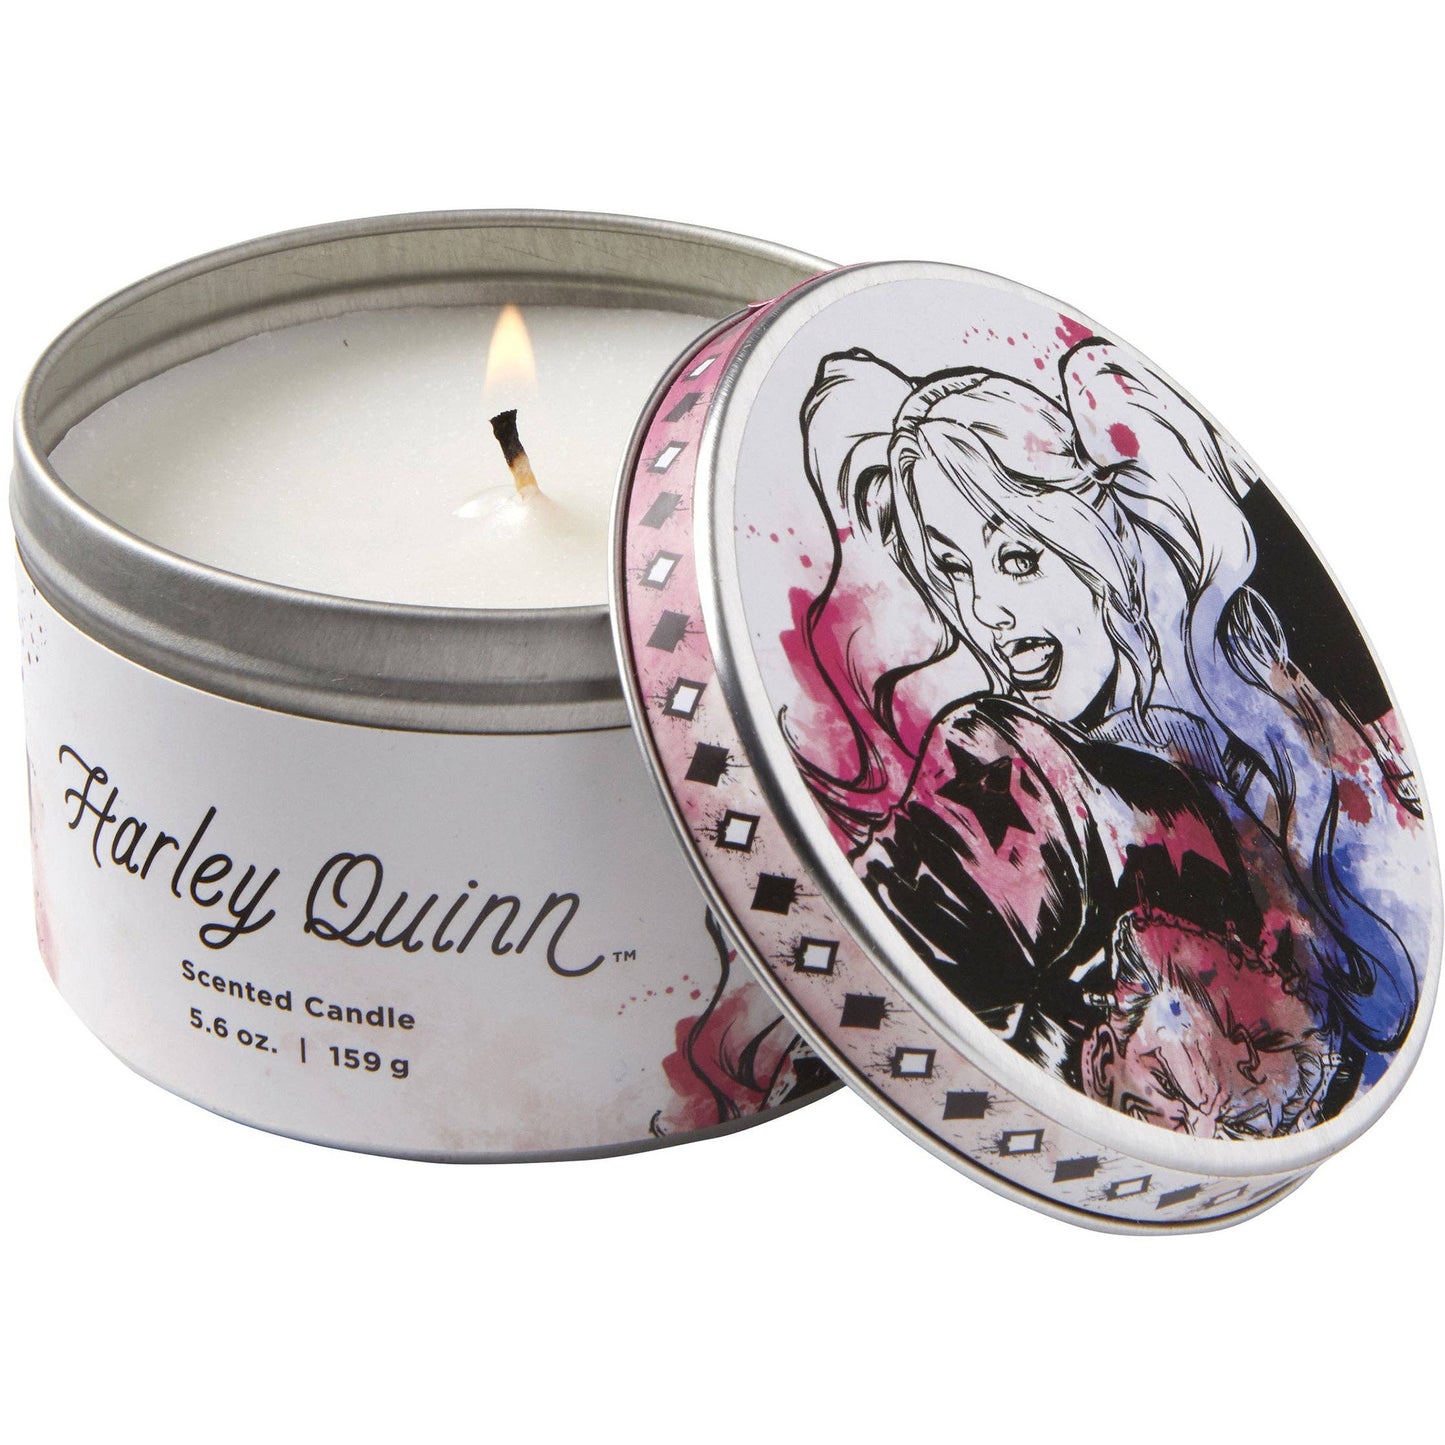 DC Comics Harley Quinn Vanilla Scented Candle (5.6 oz.) by Insight Luminaries